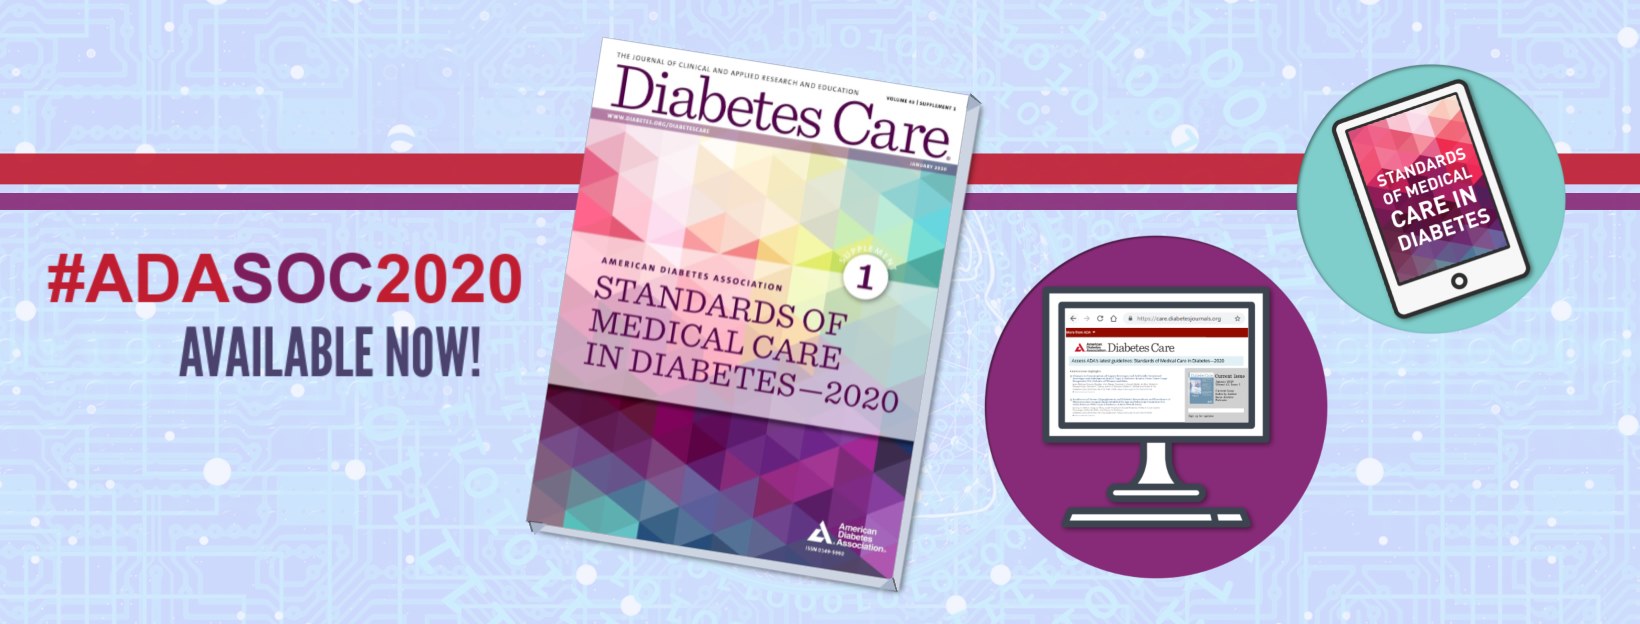 Diabetes Management Strategies for the New Year